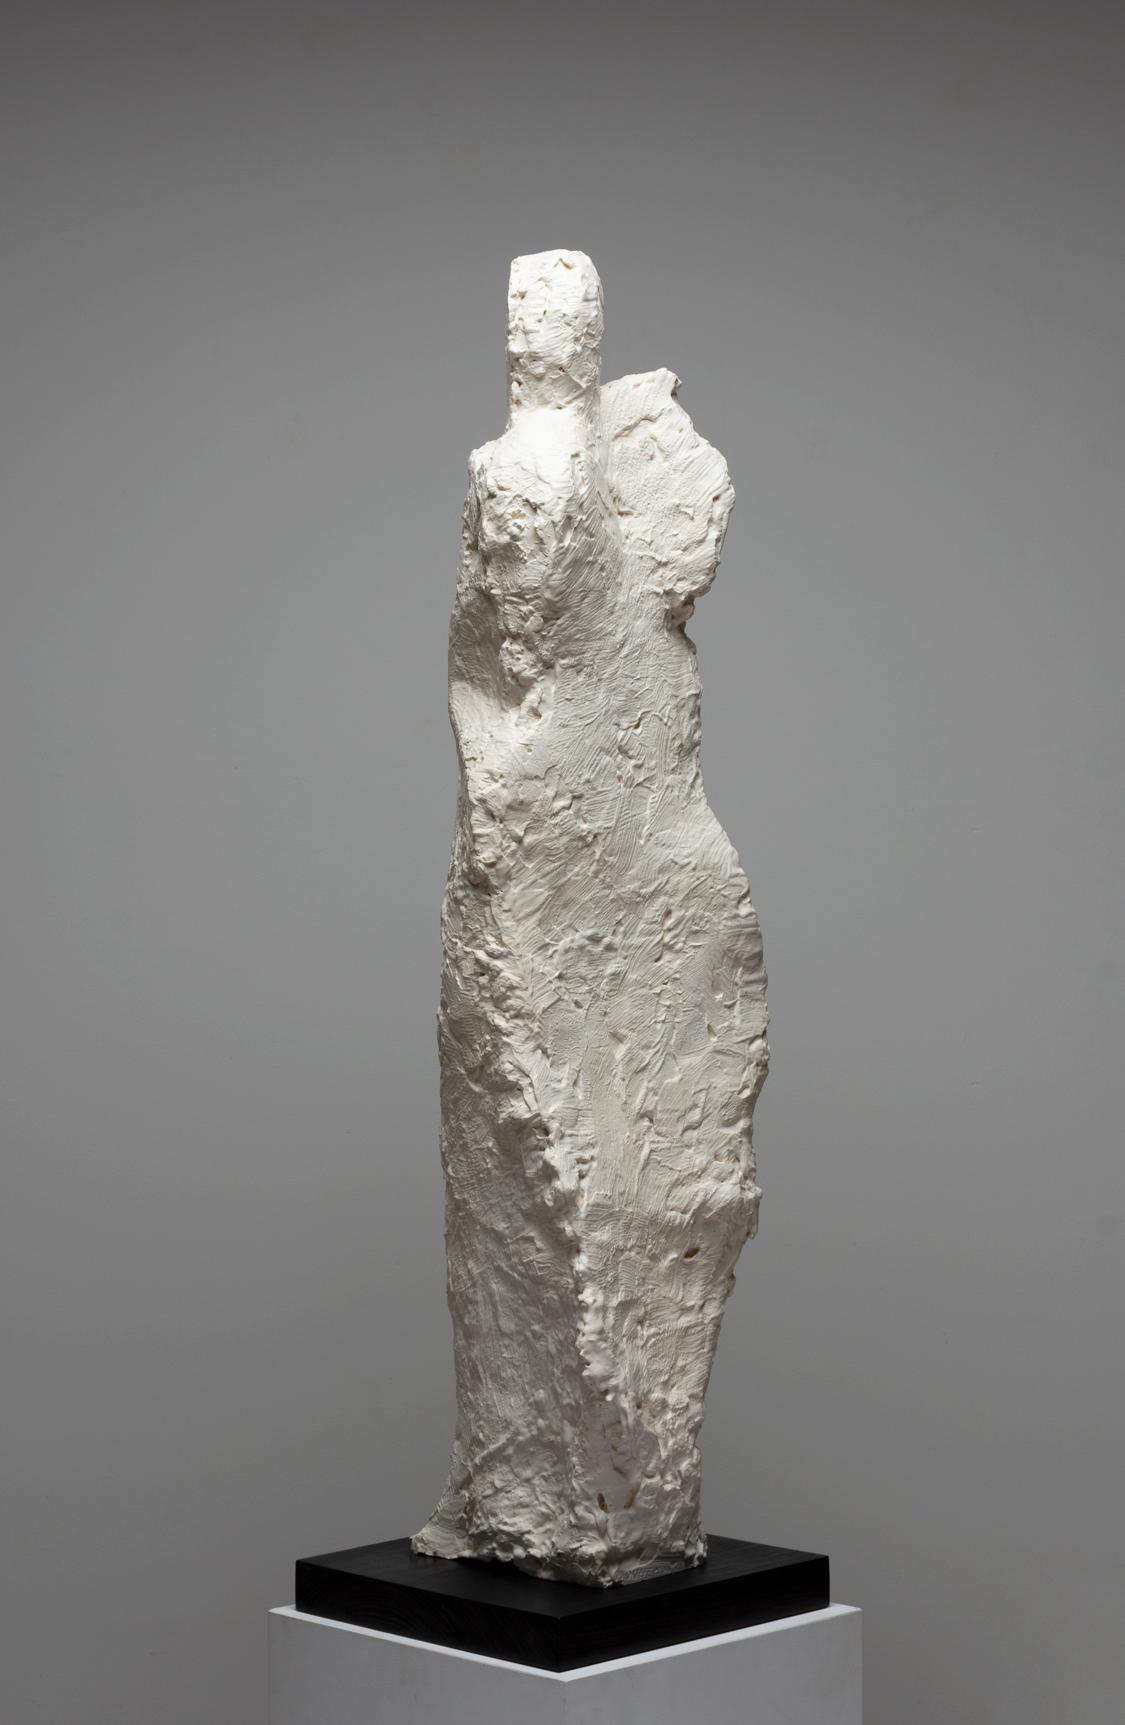 Full of Abandon, Full of Grace - Abstract Sculpture by Michael O'Keefe